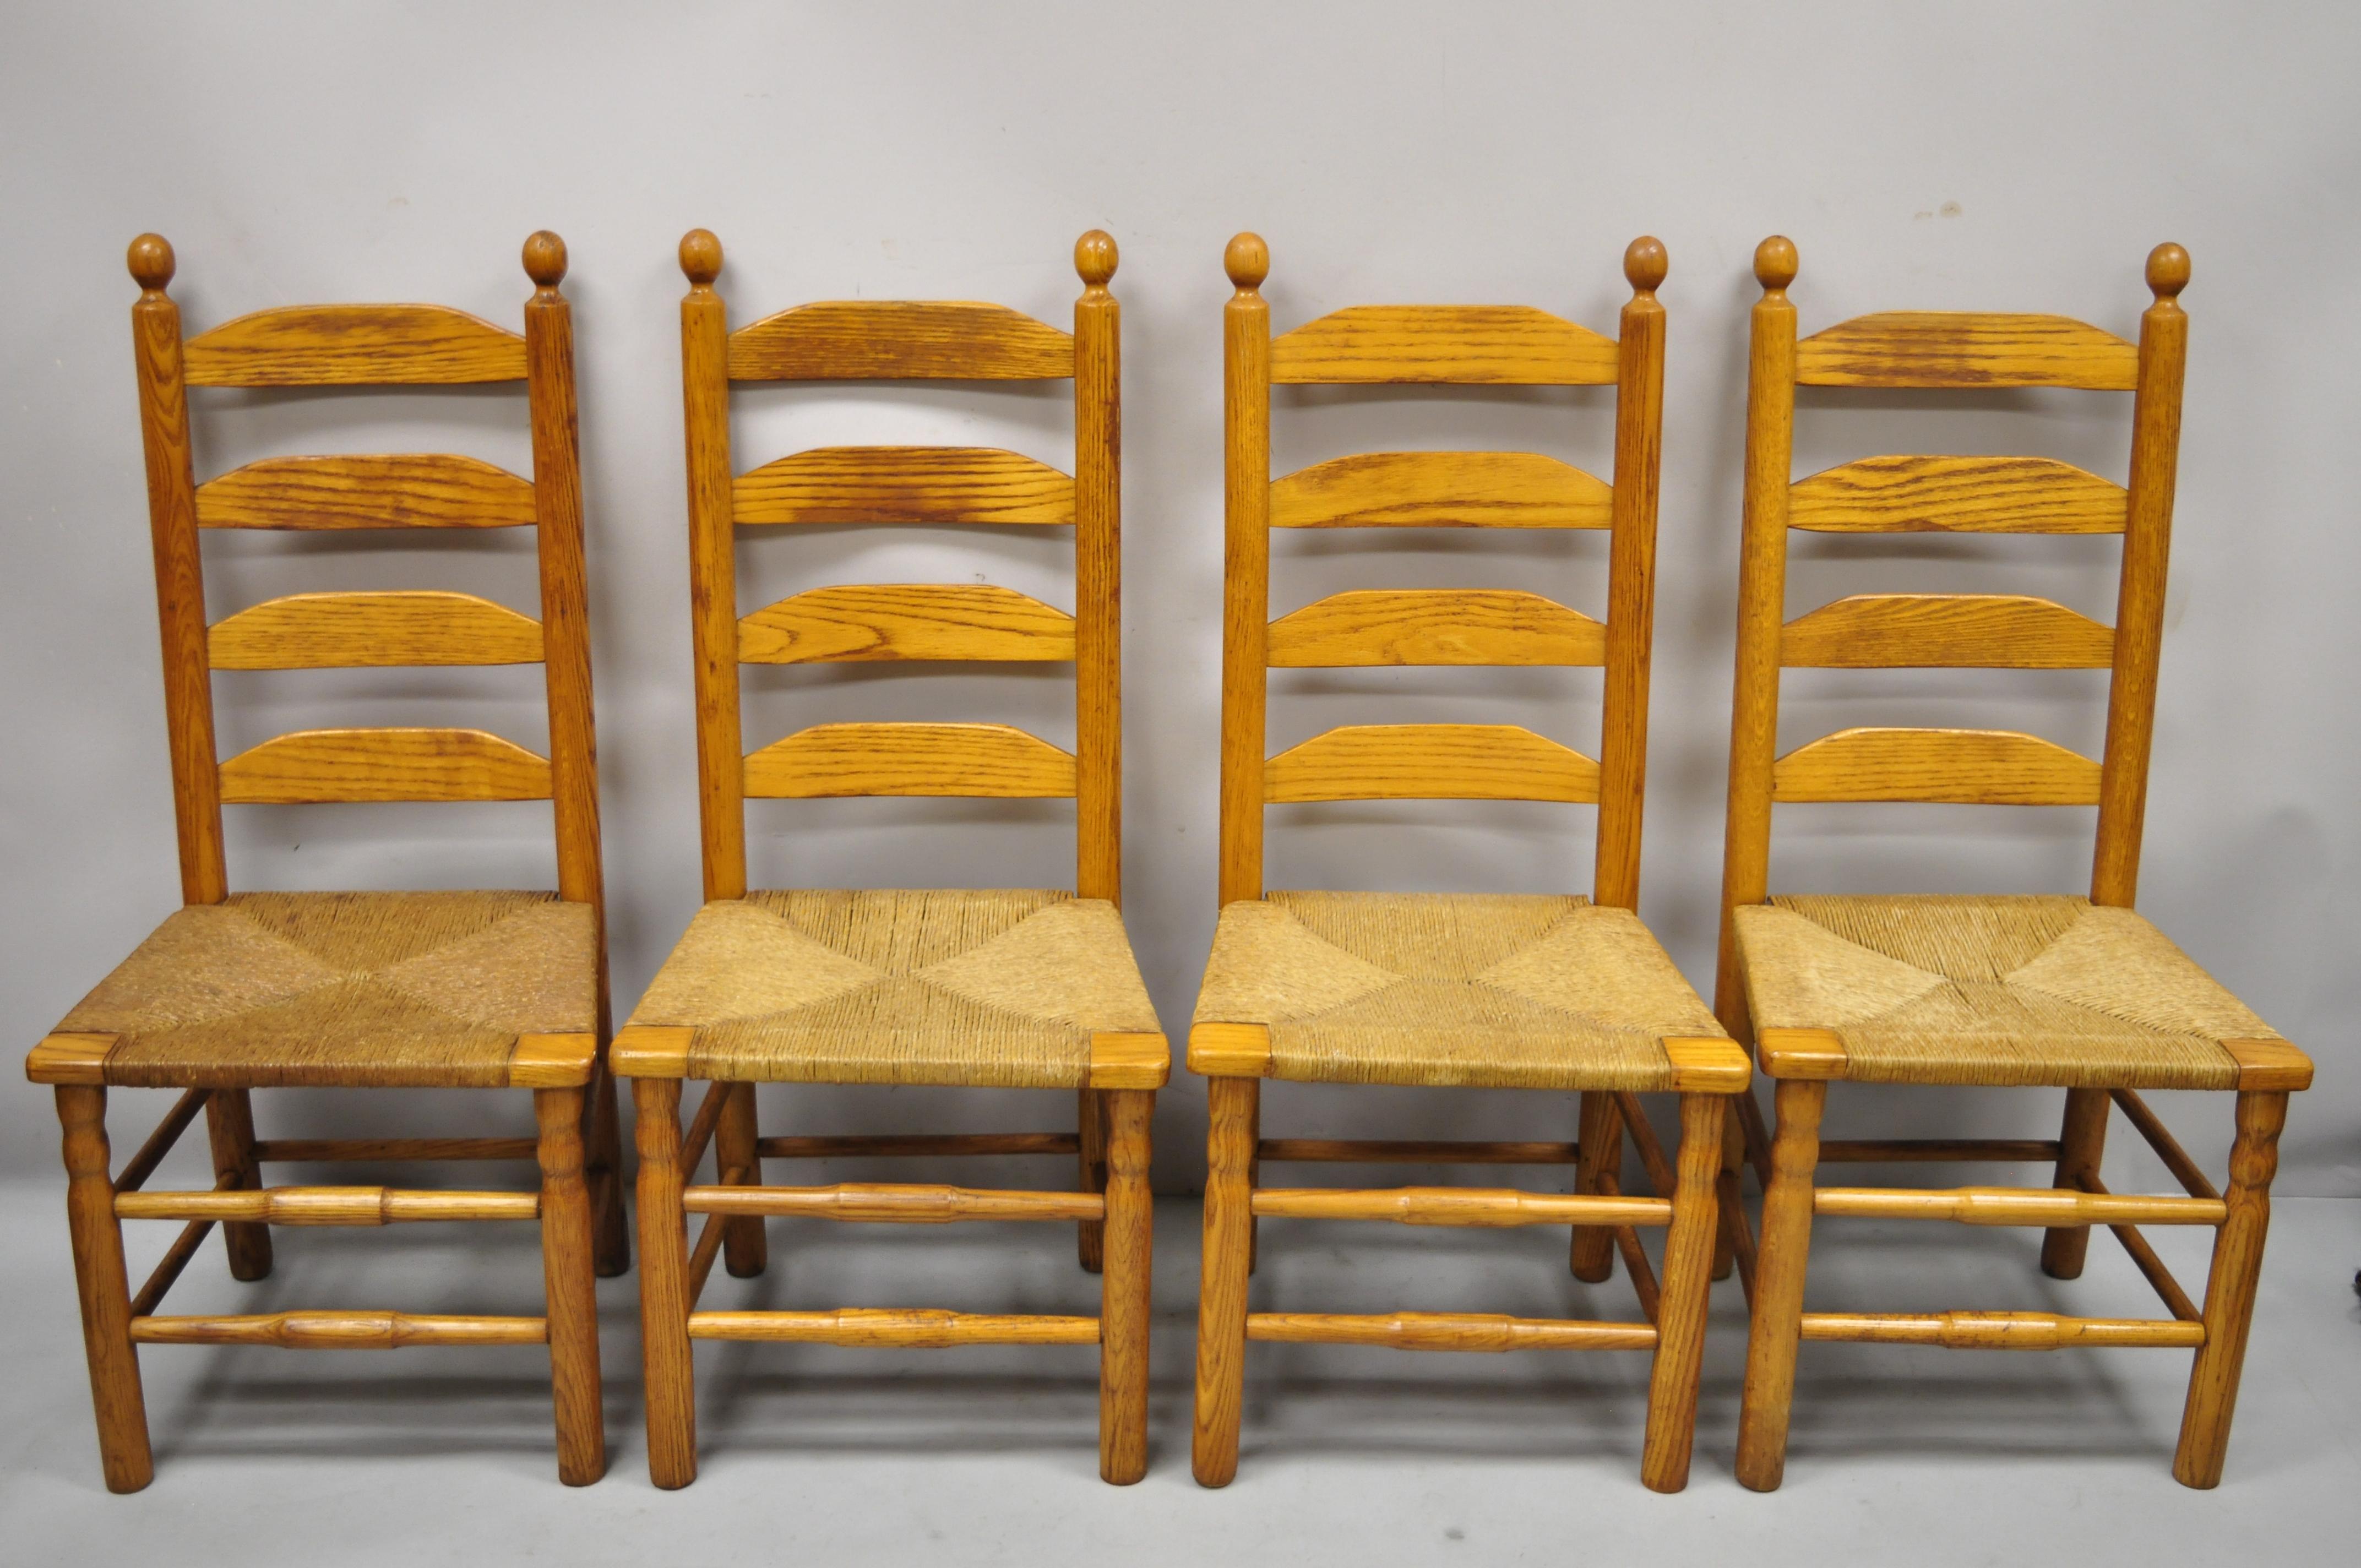 Vintage oak wood rush seat tall ladder back dining room primitive rustic chairs- Set of 6. Item features woven rush seats, beautiful wood grain, very nice vintage set, great style and form. Circa late 20th century. Measurements: 42